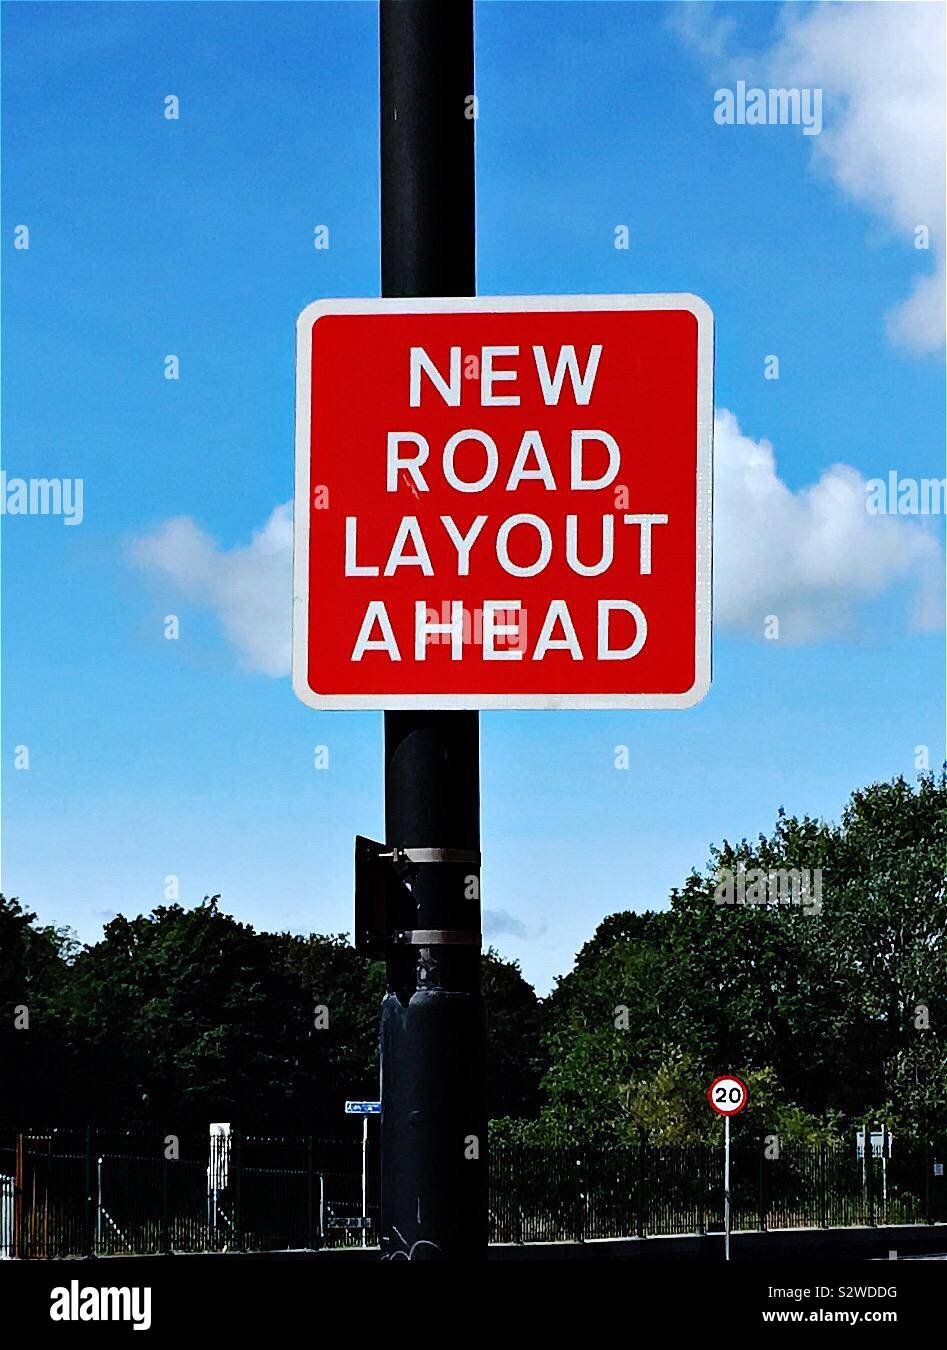 U.K. road sign in red and white, indicating a new road layout ahead. Stock Photo